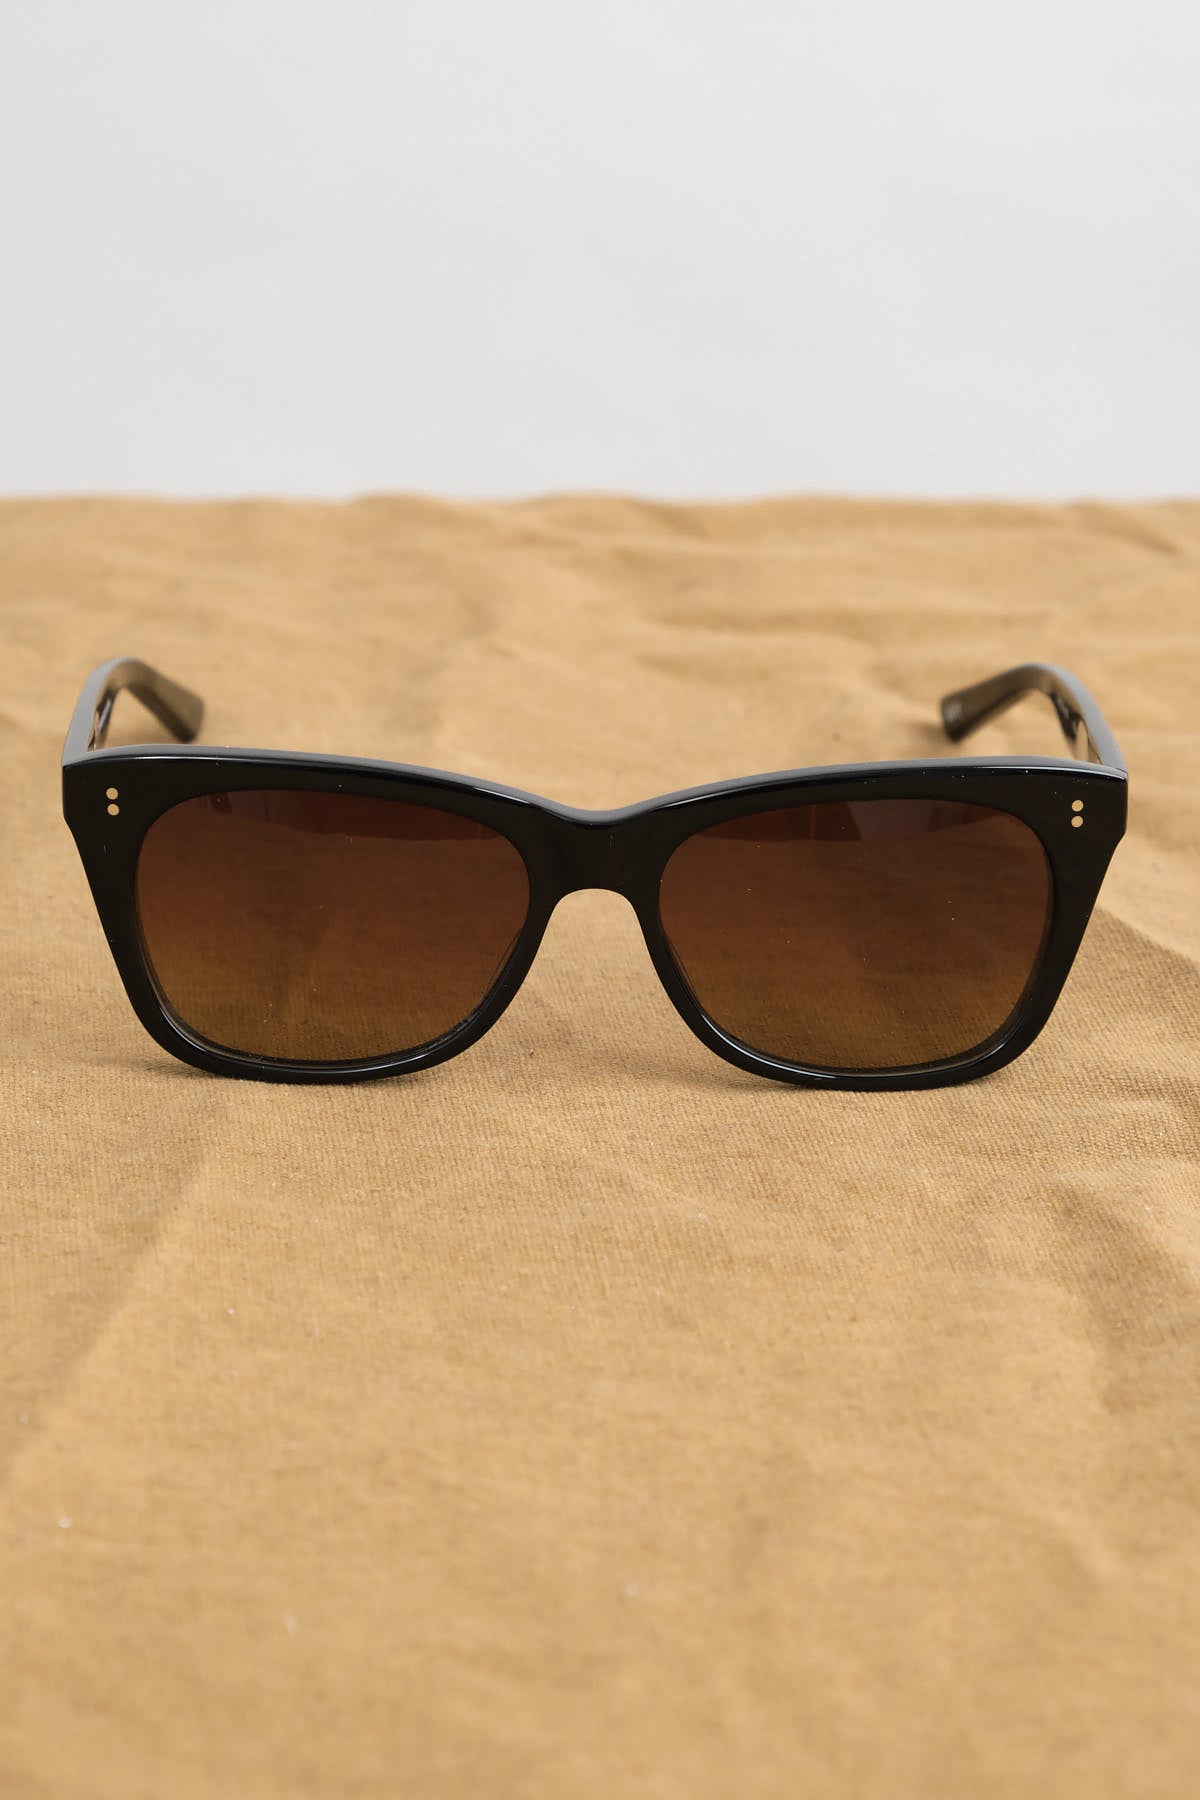 Sela Sunglasses in Black with Brown gradient polarized lenses